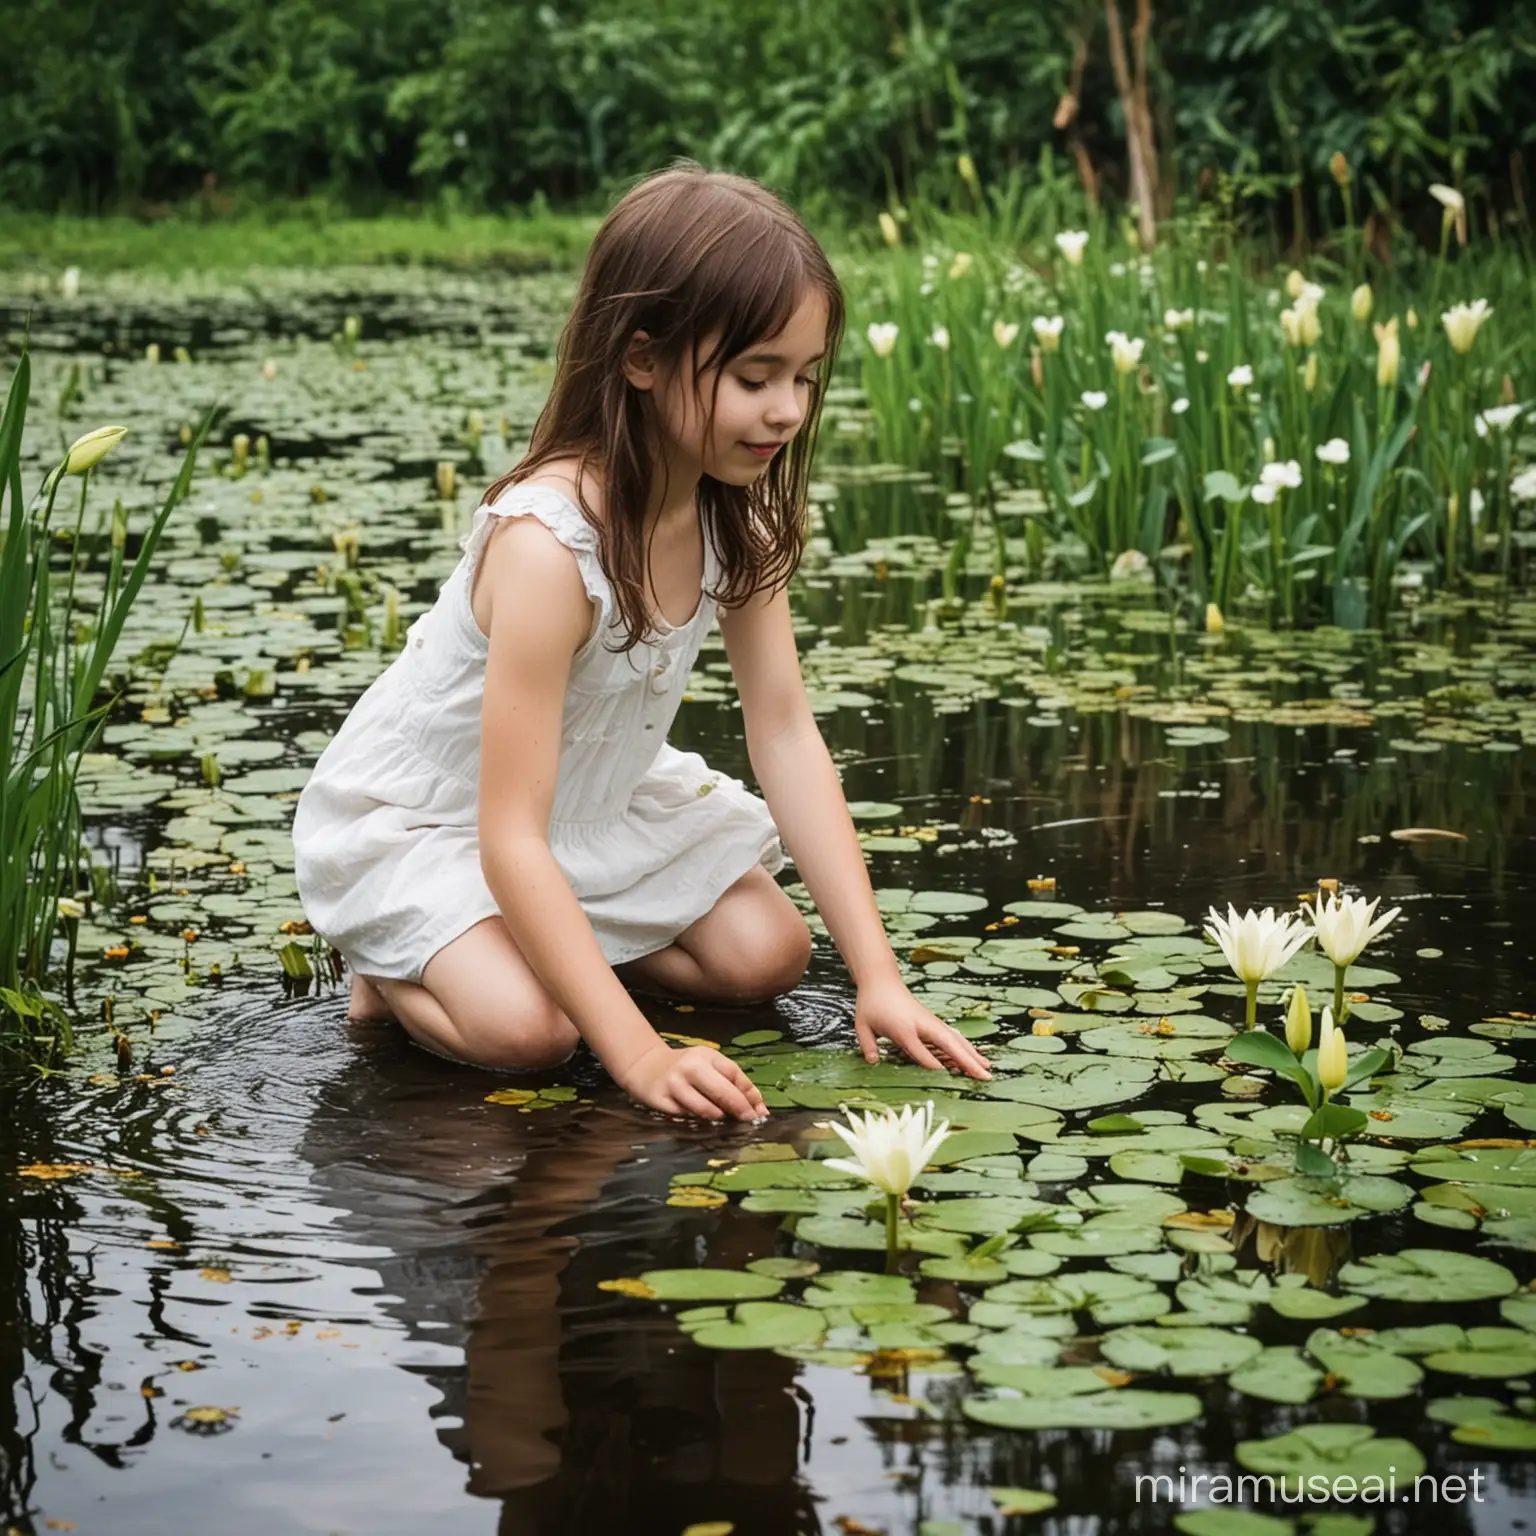 ,
Lilies and water swamp a girl playing
